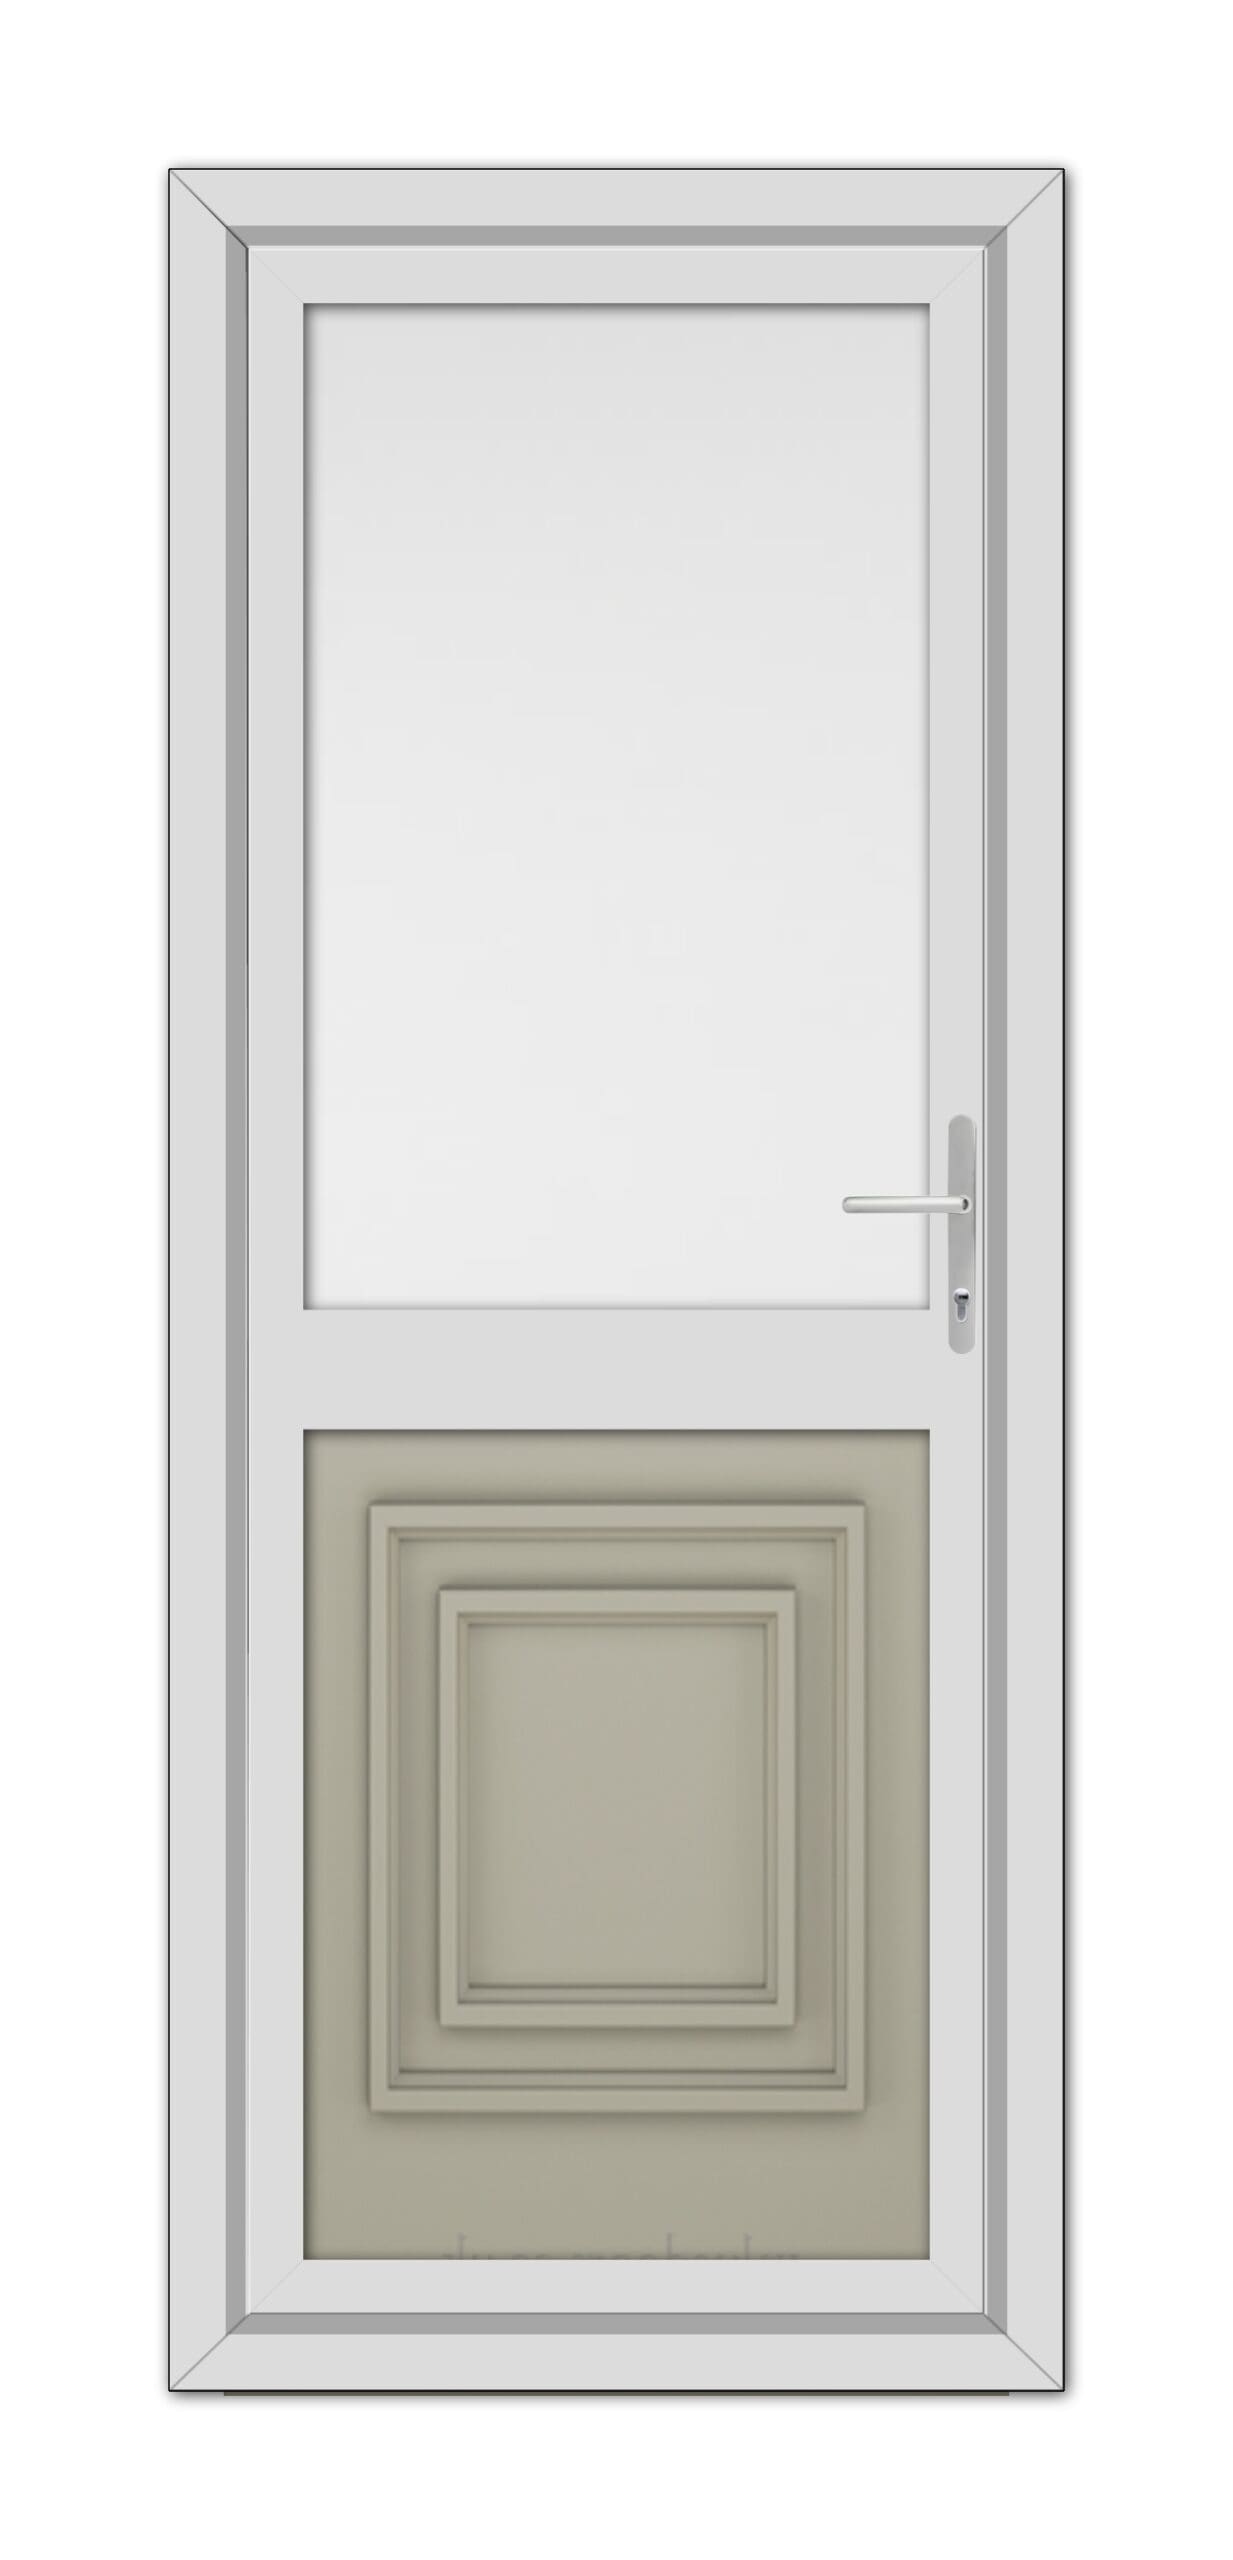 A modern white Pebble Grey Hannover Half uPVC Back Door with a silver handle, featuring a large upper window and a decorative lower raised panel.